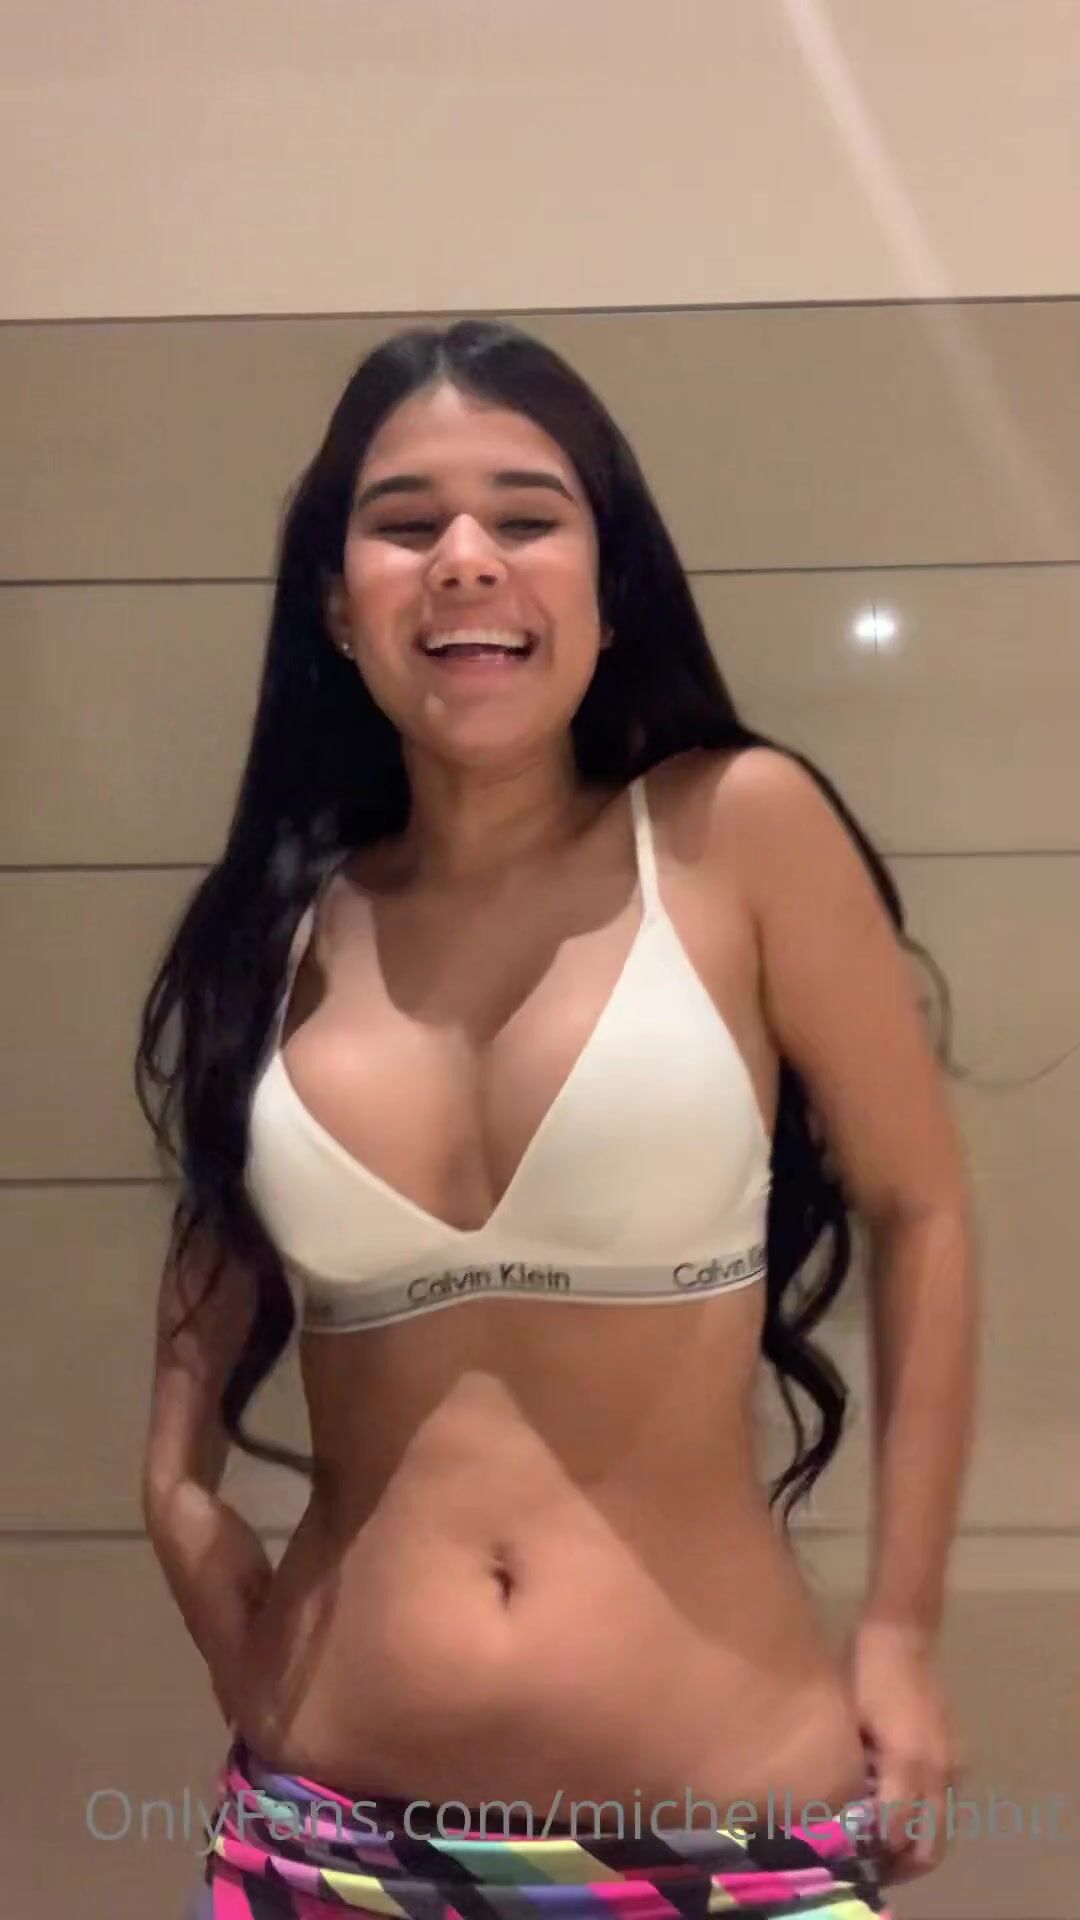 Watch Free Michelle Rabbit Naked Changing Room Onlyfans Video Leaked Porn Video Sextaped Com